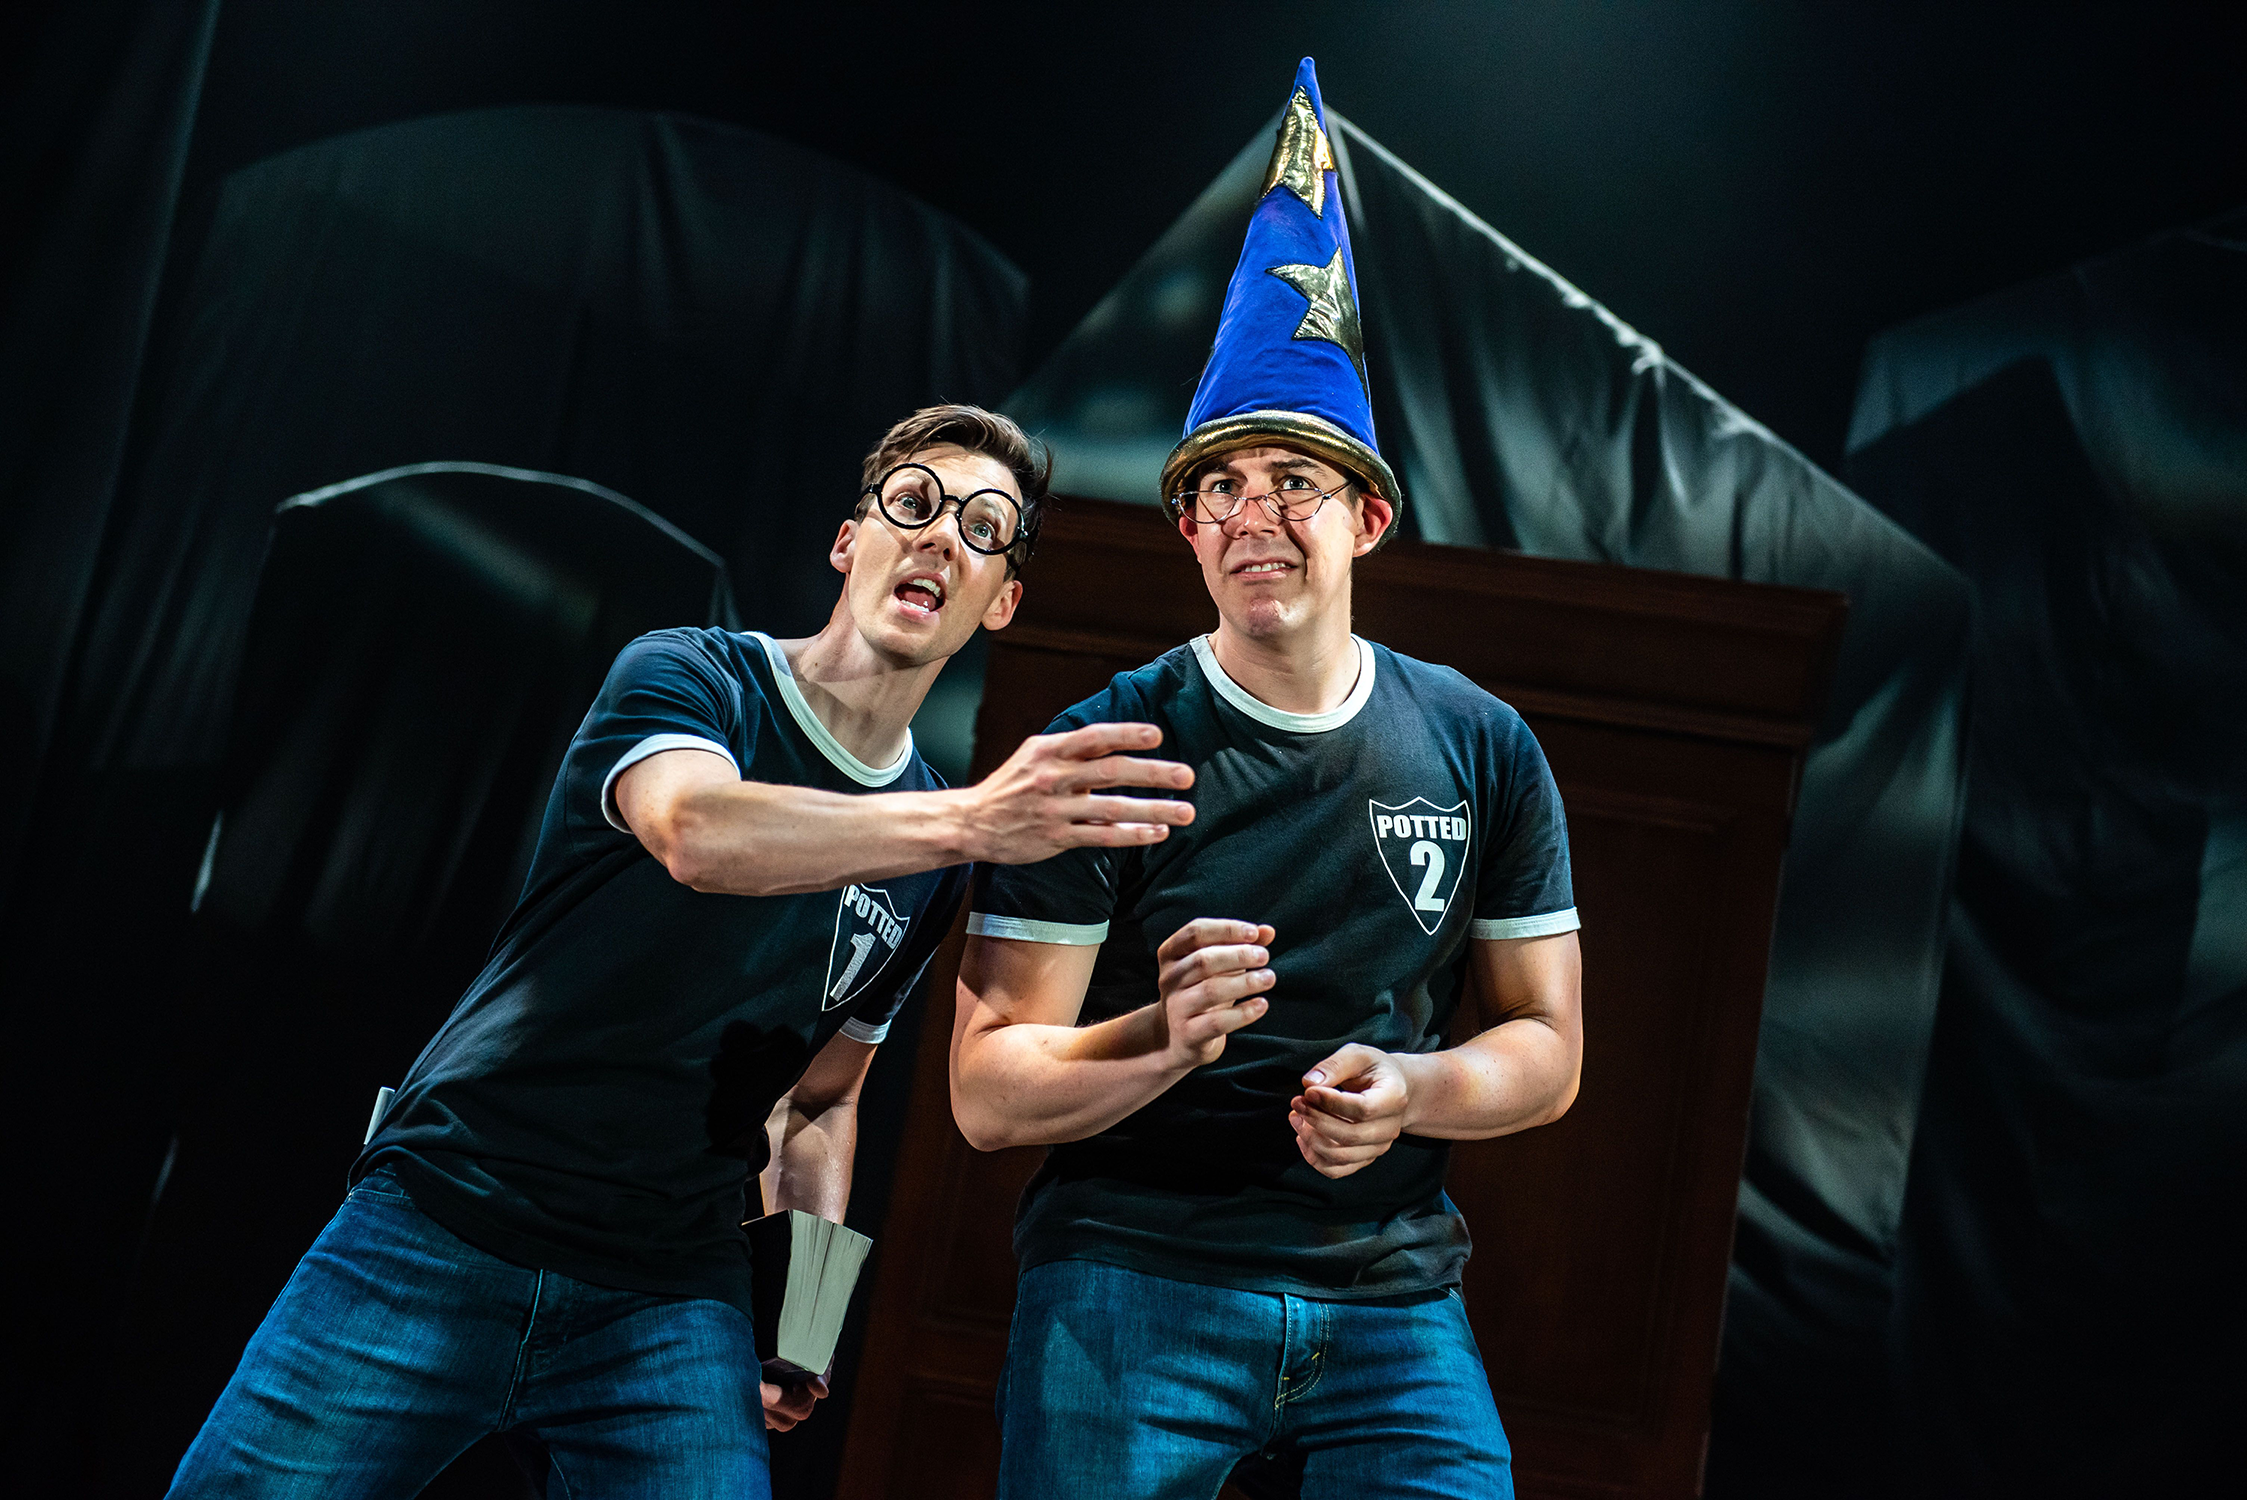 Potted Potter - AWARDED